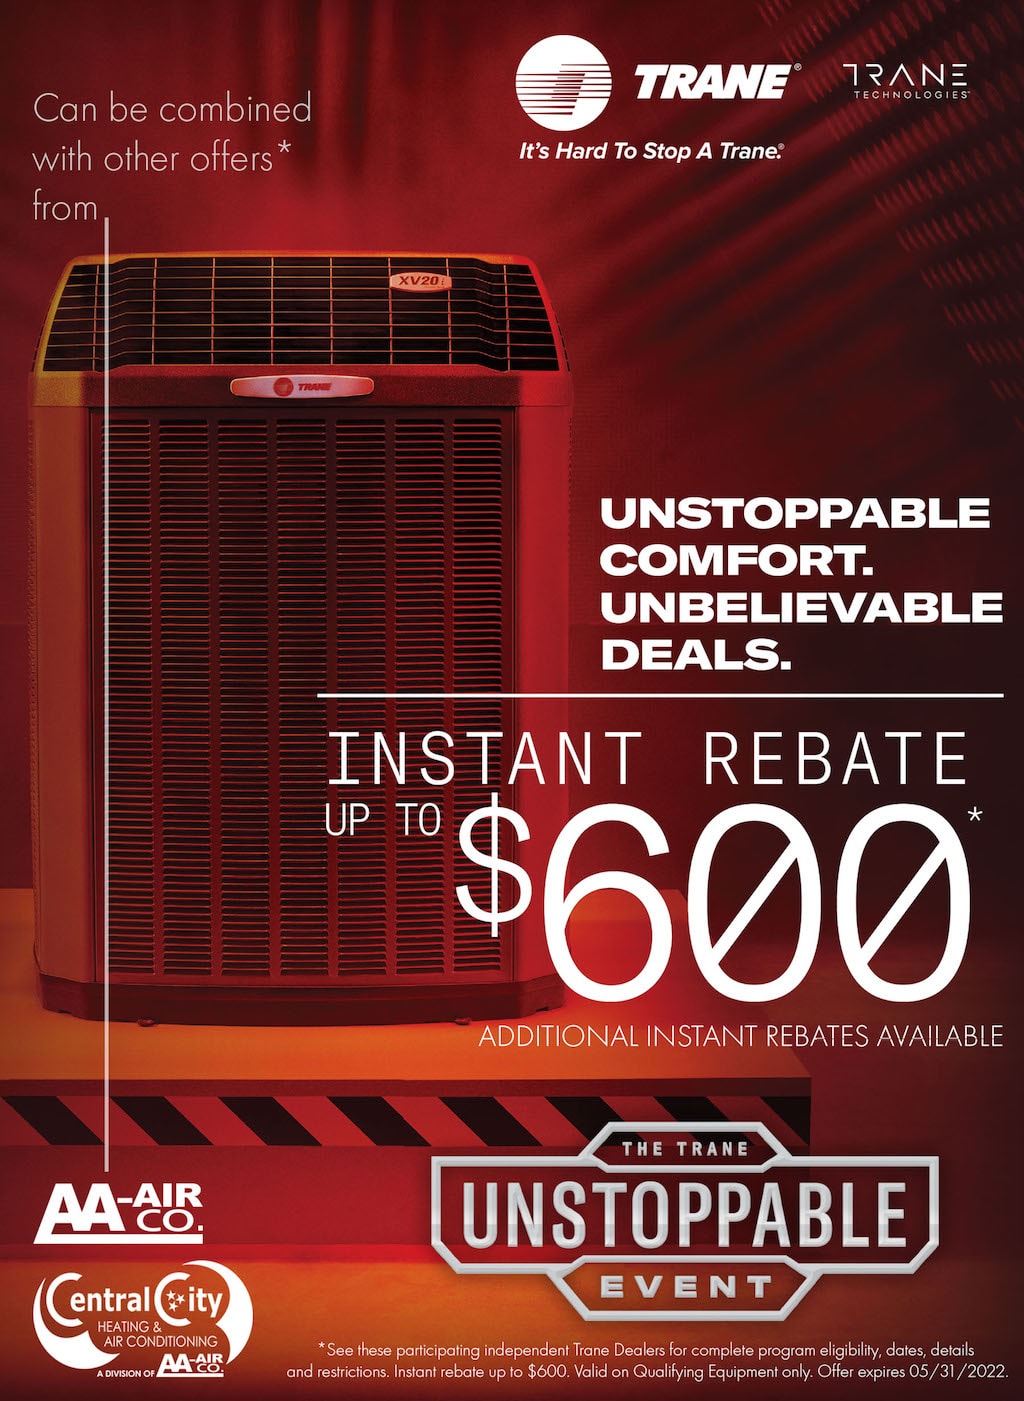 Trane Instant Rebate up to $600. Restrictions may apply. Call for details. Valid on qualified equipment only. Offer expires 5/31/22.